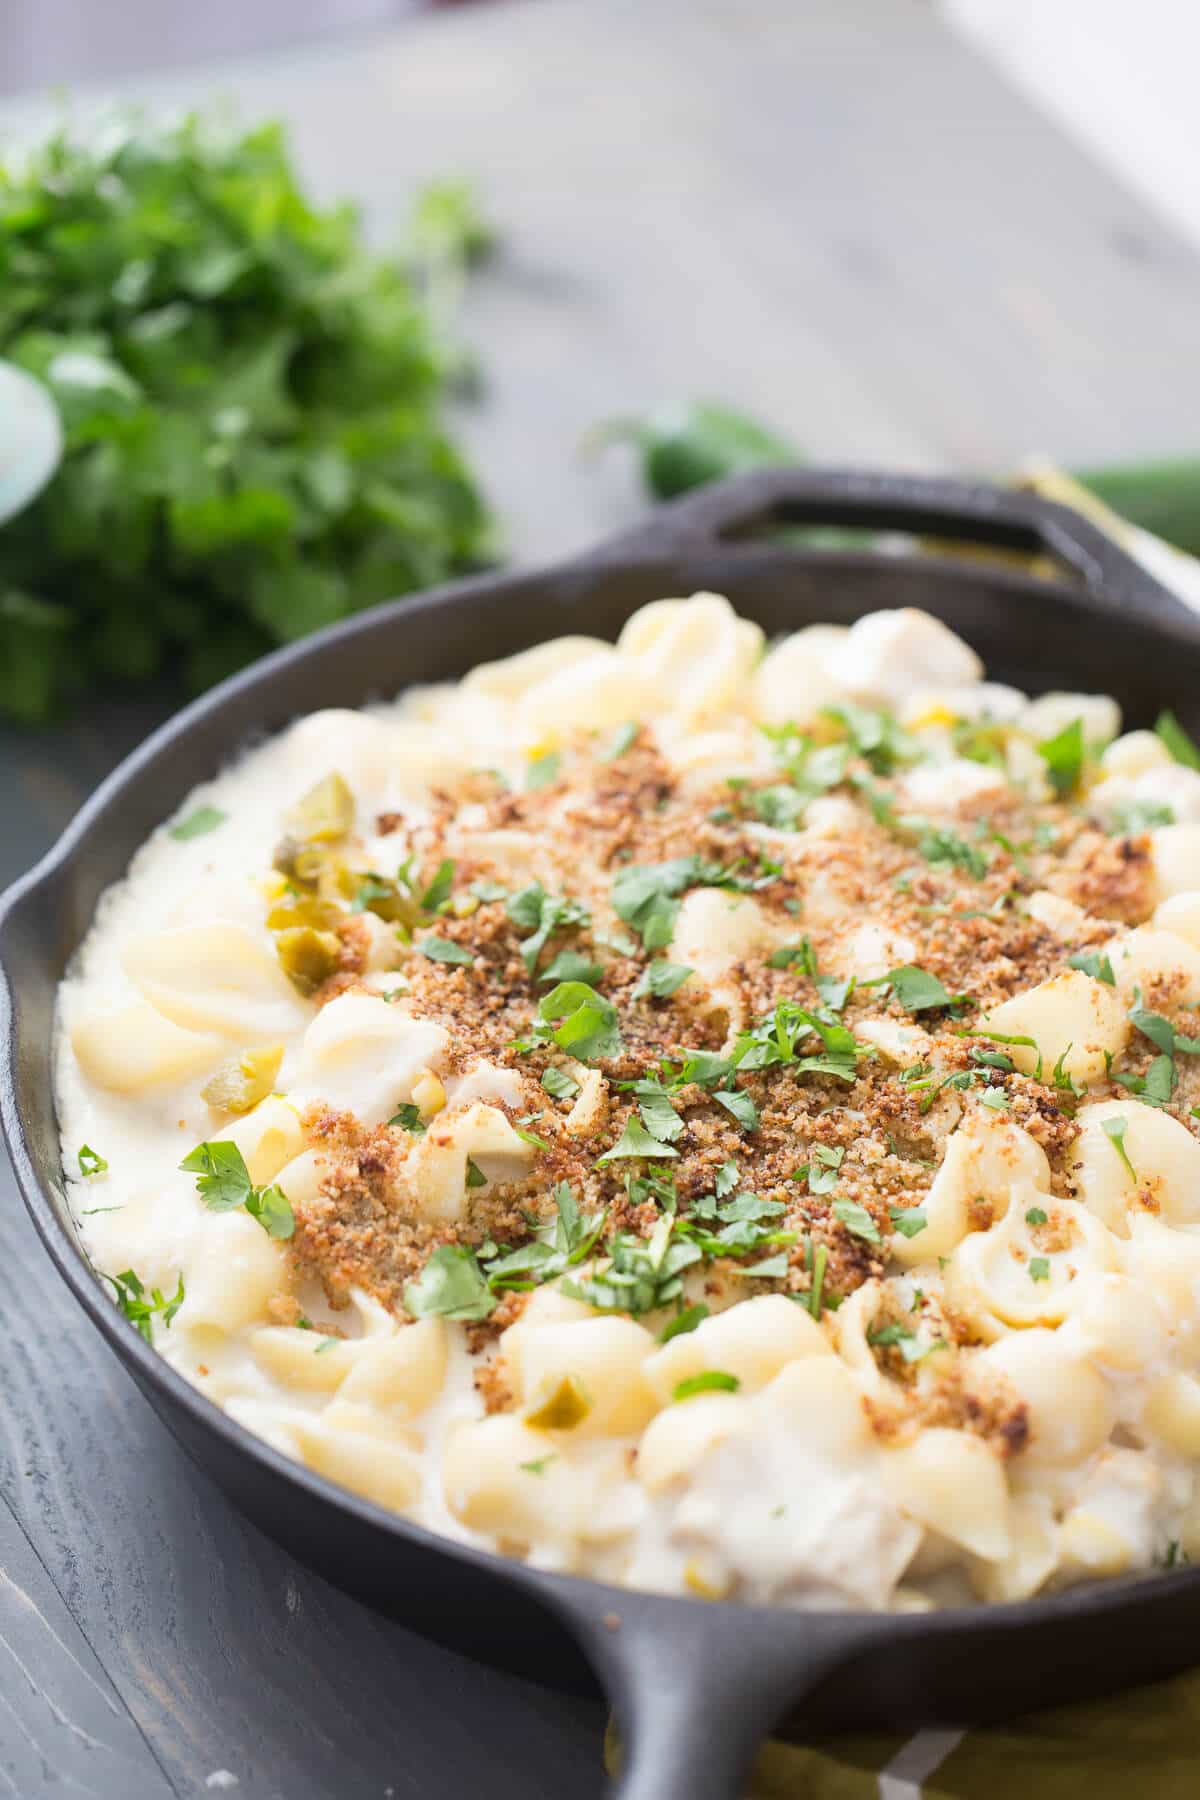 Mexican Mac and Cheese features chicken, veggies and lots of cheese! Your family is going to love this recipe!